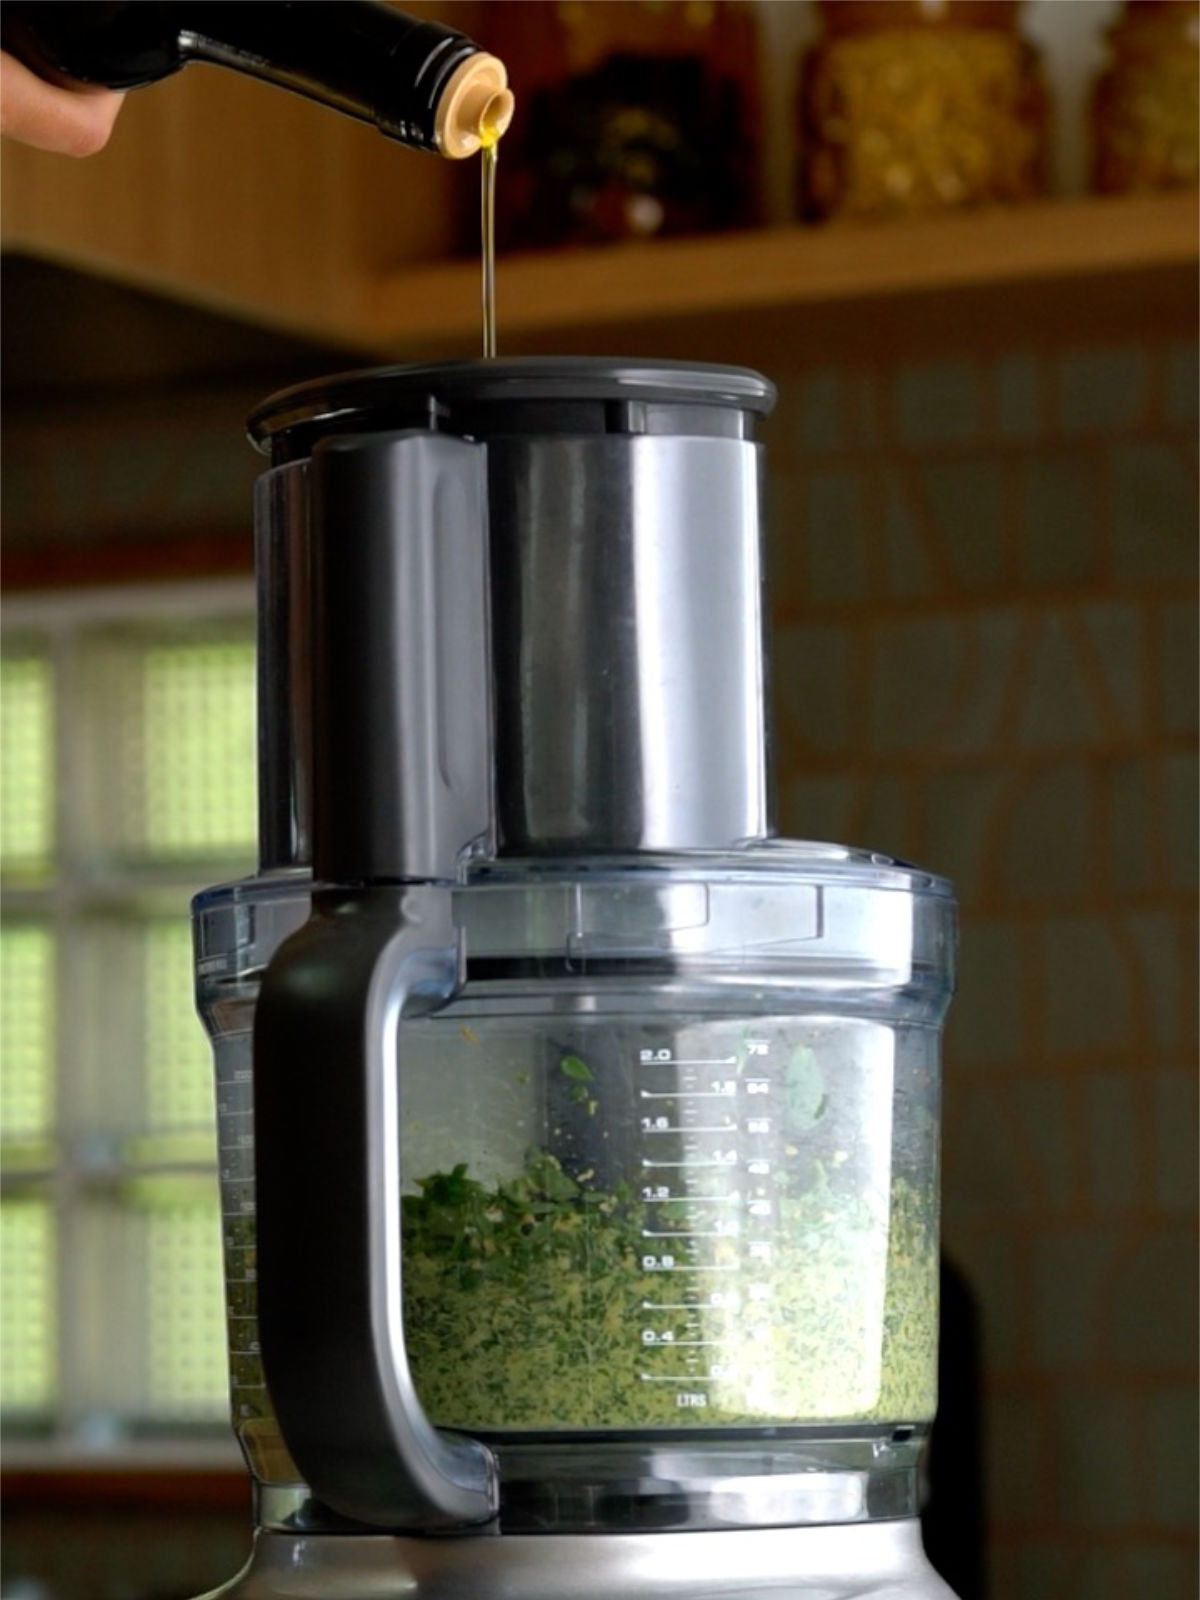 Pouring olive oil into the top of a food processor with green pesto in the bowl.